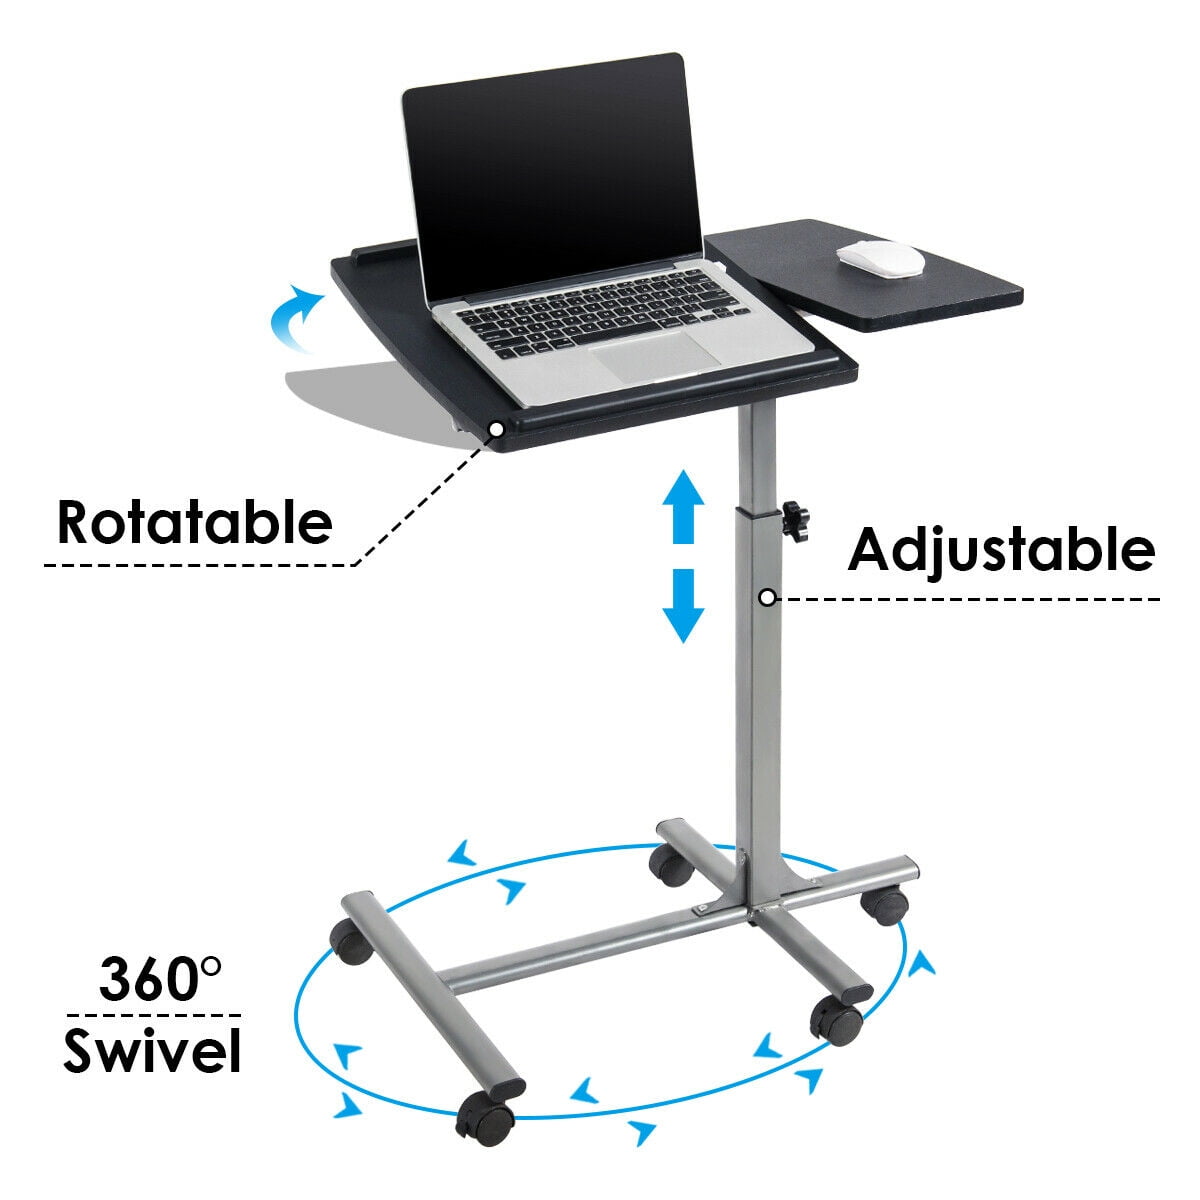 Heavy Duty Angle & Height Adjustable Rolling Laptop Notebook Desk Sofa Bed Table Stand with Side Table and Casters 180° Tilt 360° Swivel Space-Saving Multifunctional Desk for Study Or Work 